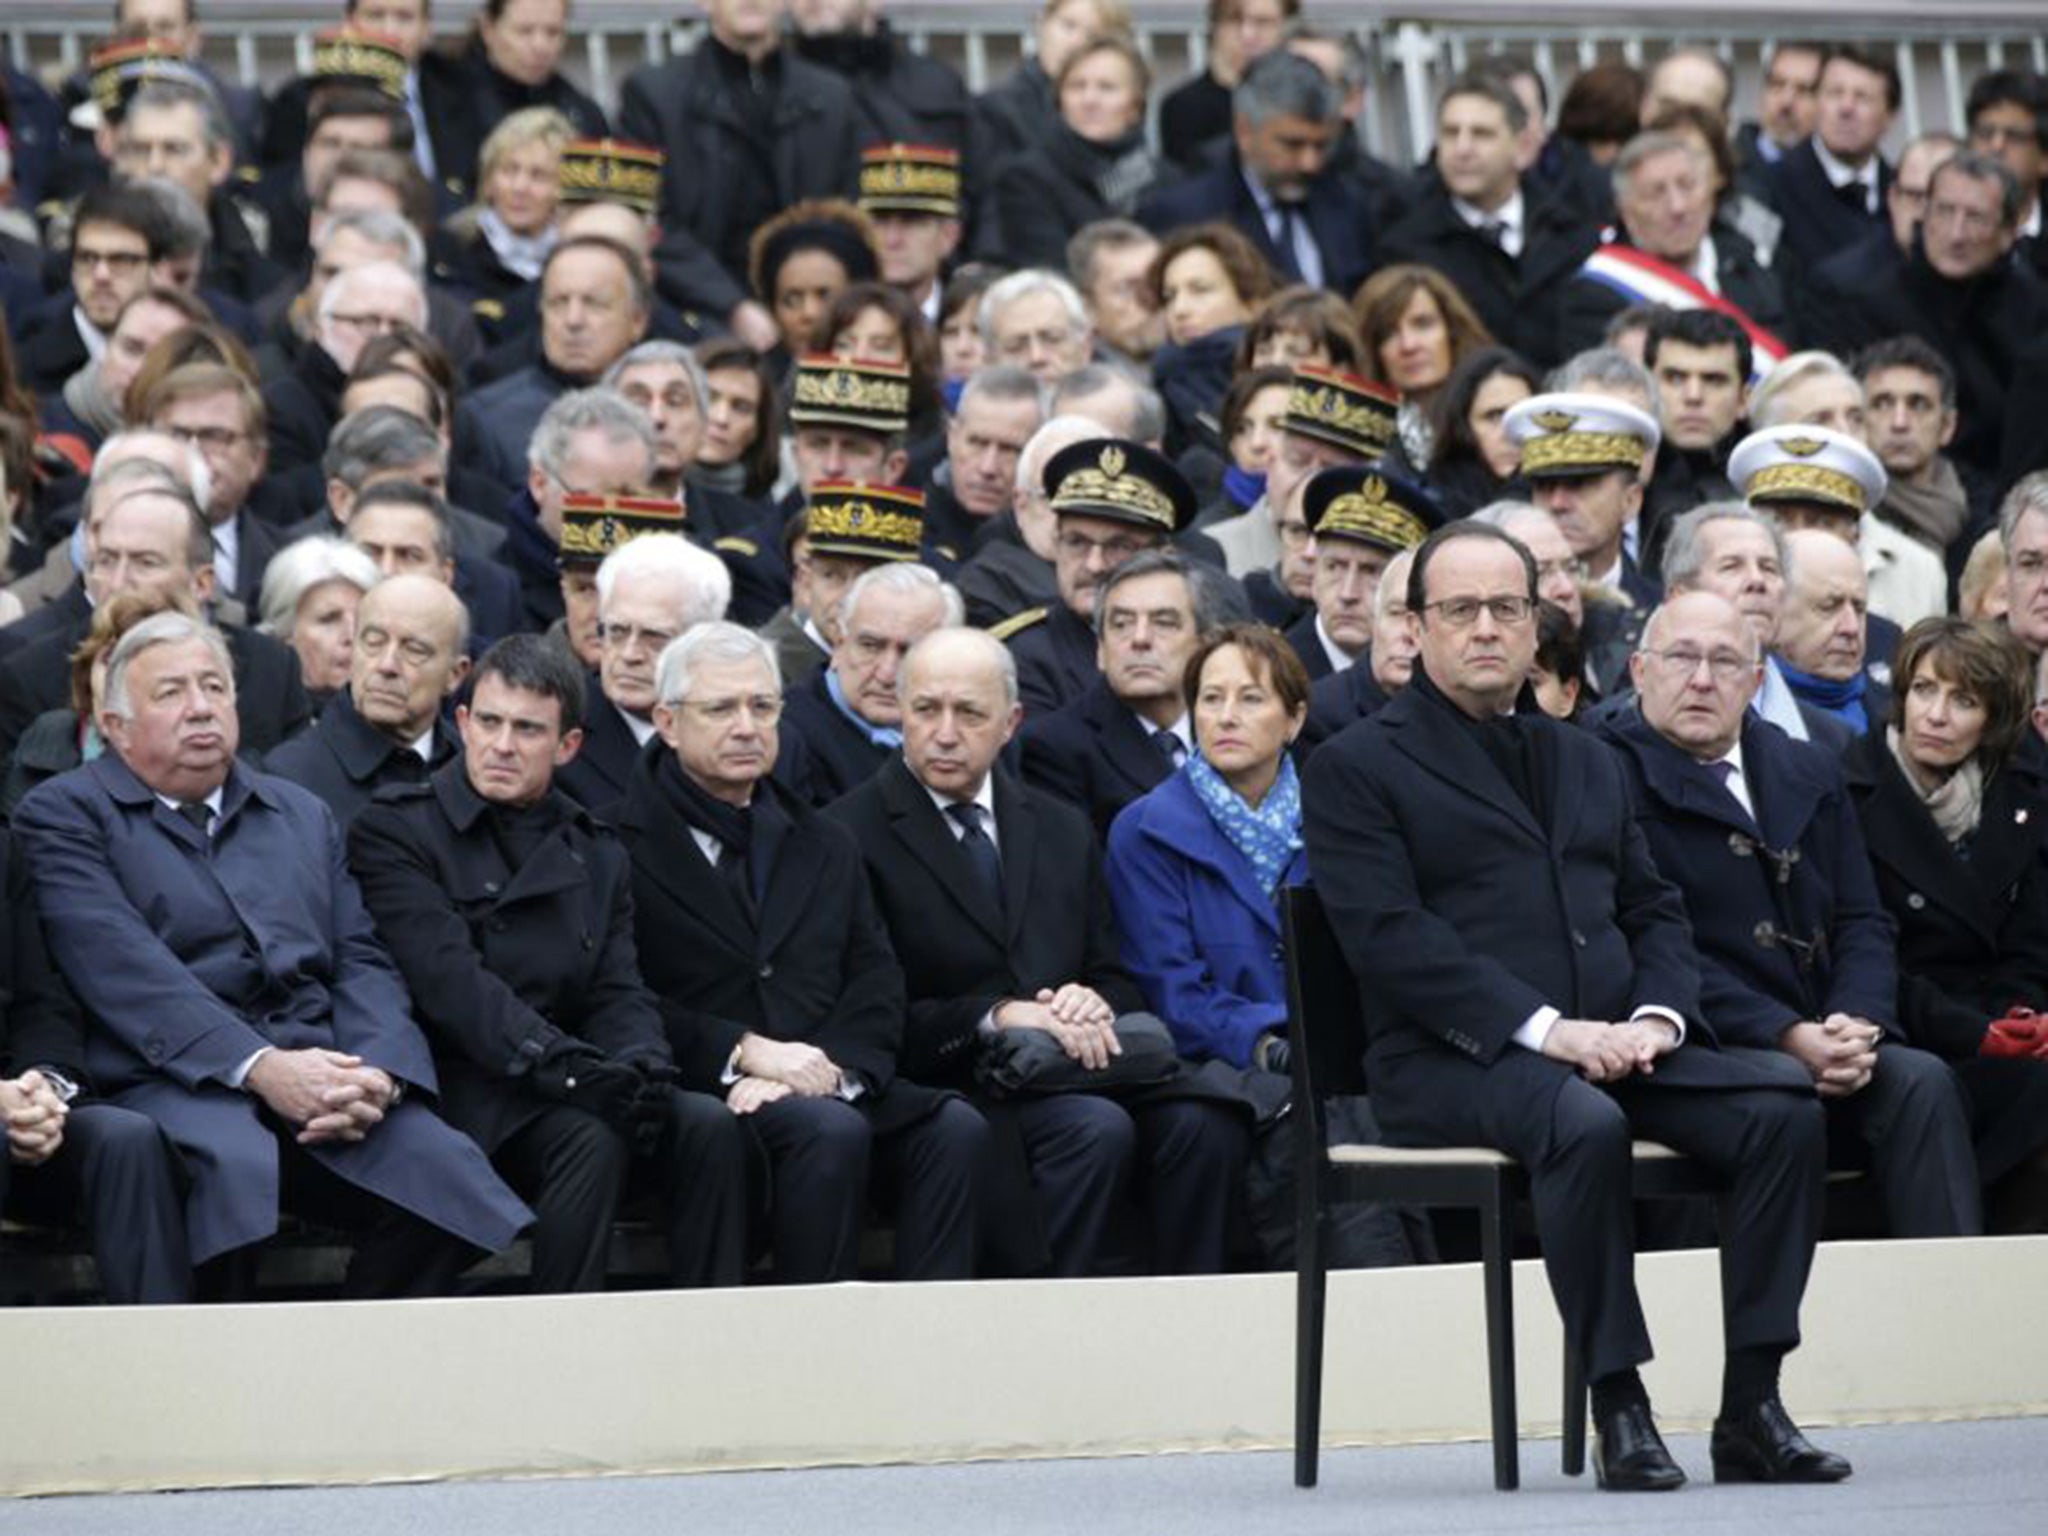 French President Francois Hollande, right, attends a ceremony to honor the 130 victims killed in the 13 November attacks